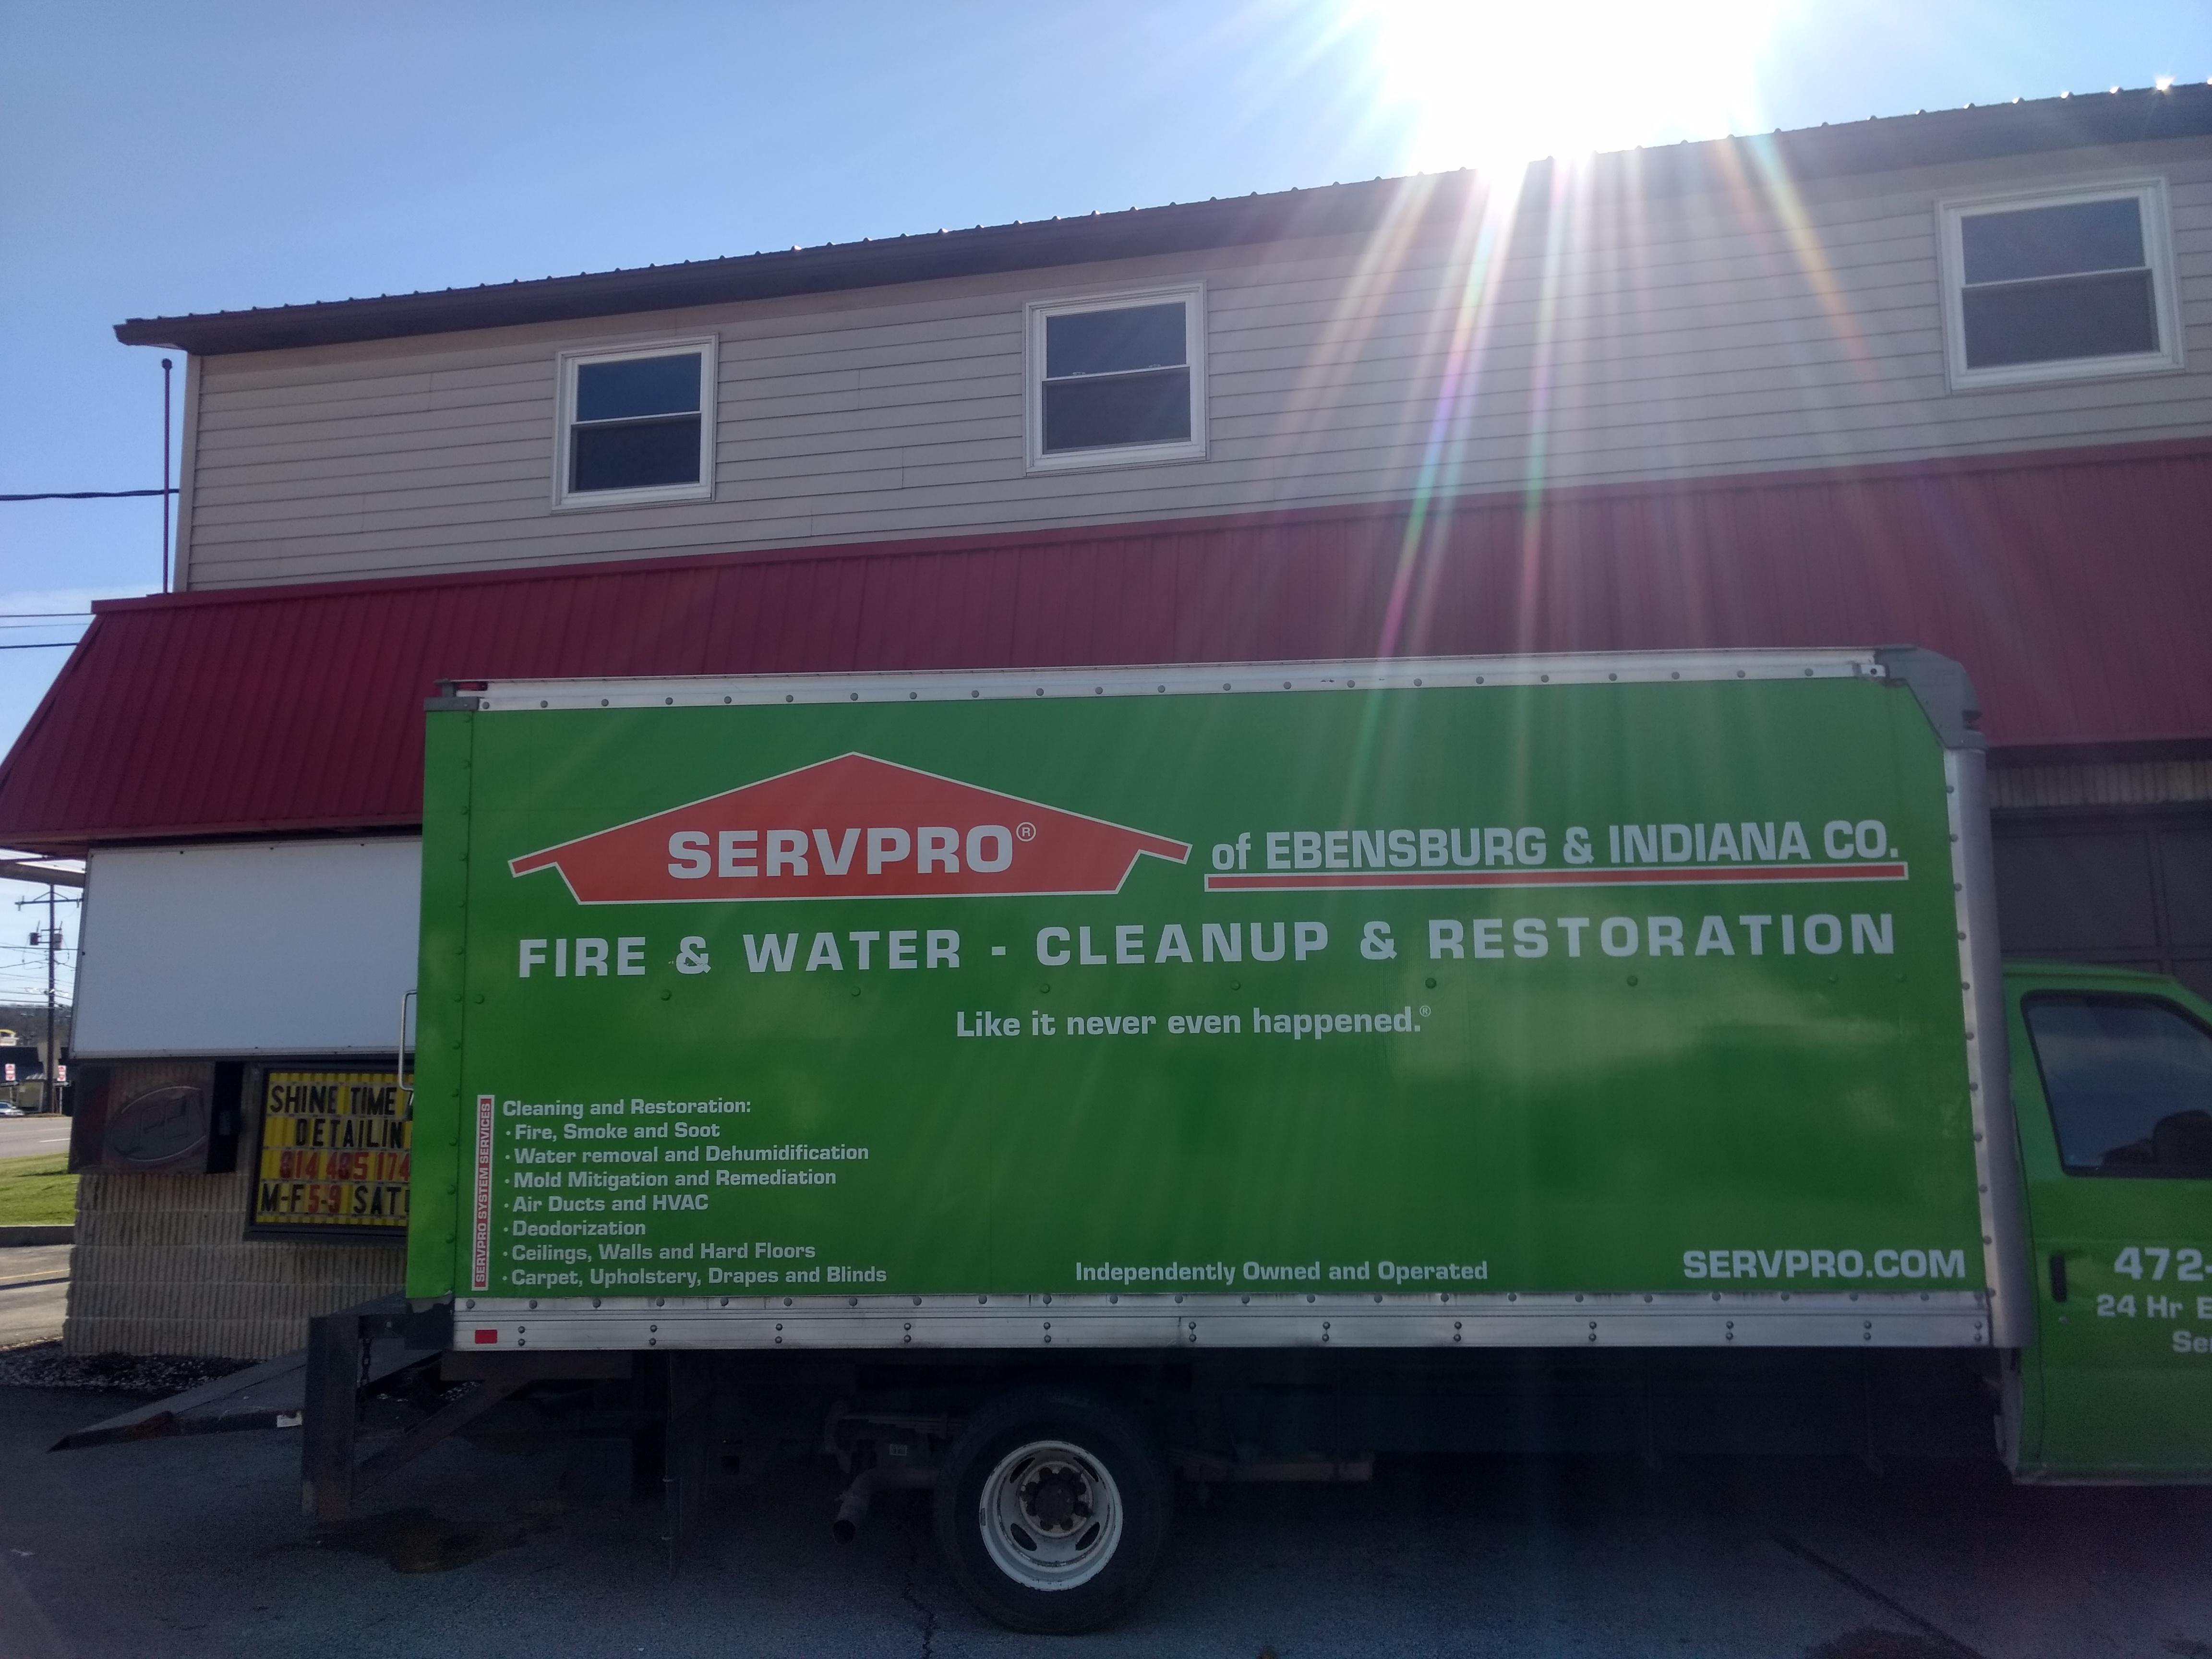 No size loss is too large for our SERVPRO of Ebensburg team!